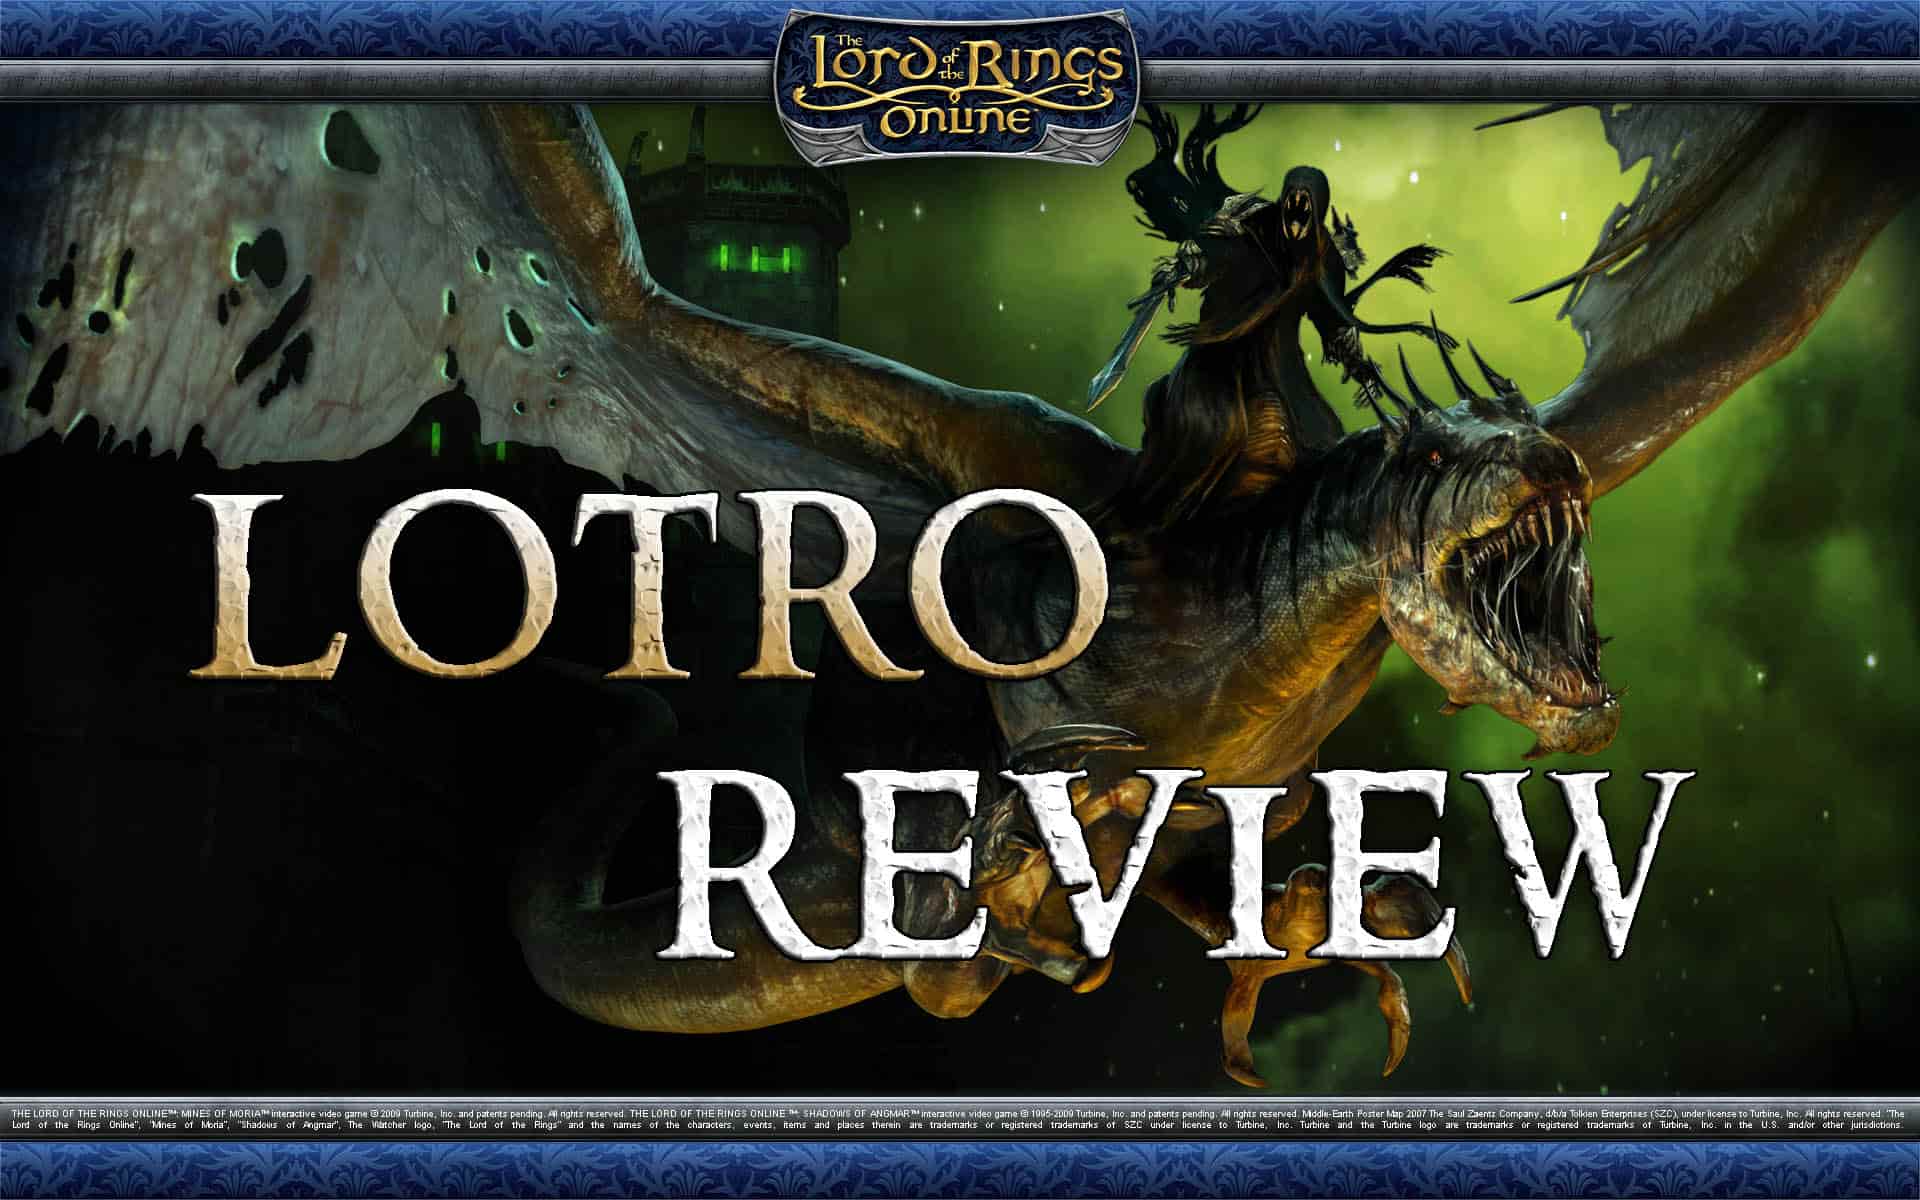 The Lord of the Rings Online PC Review